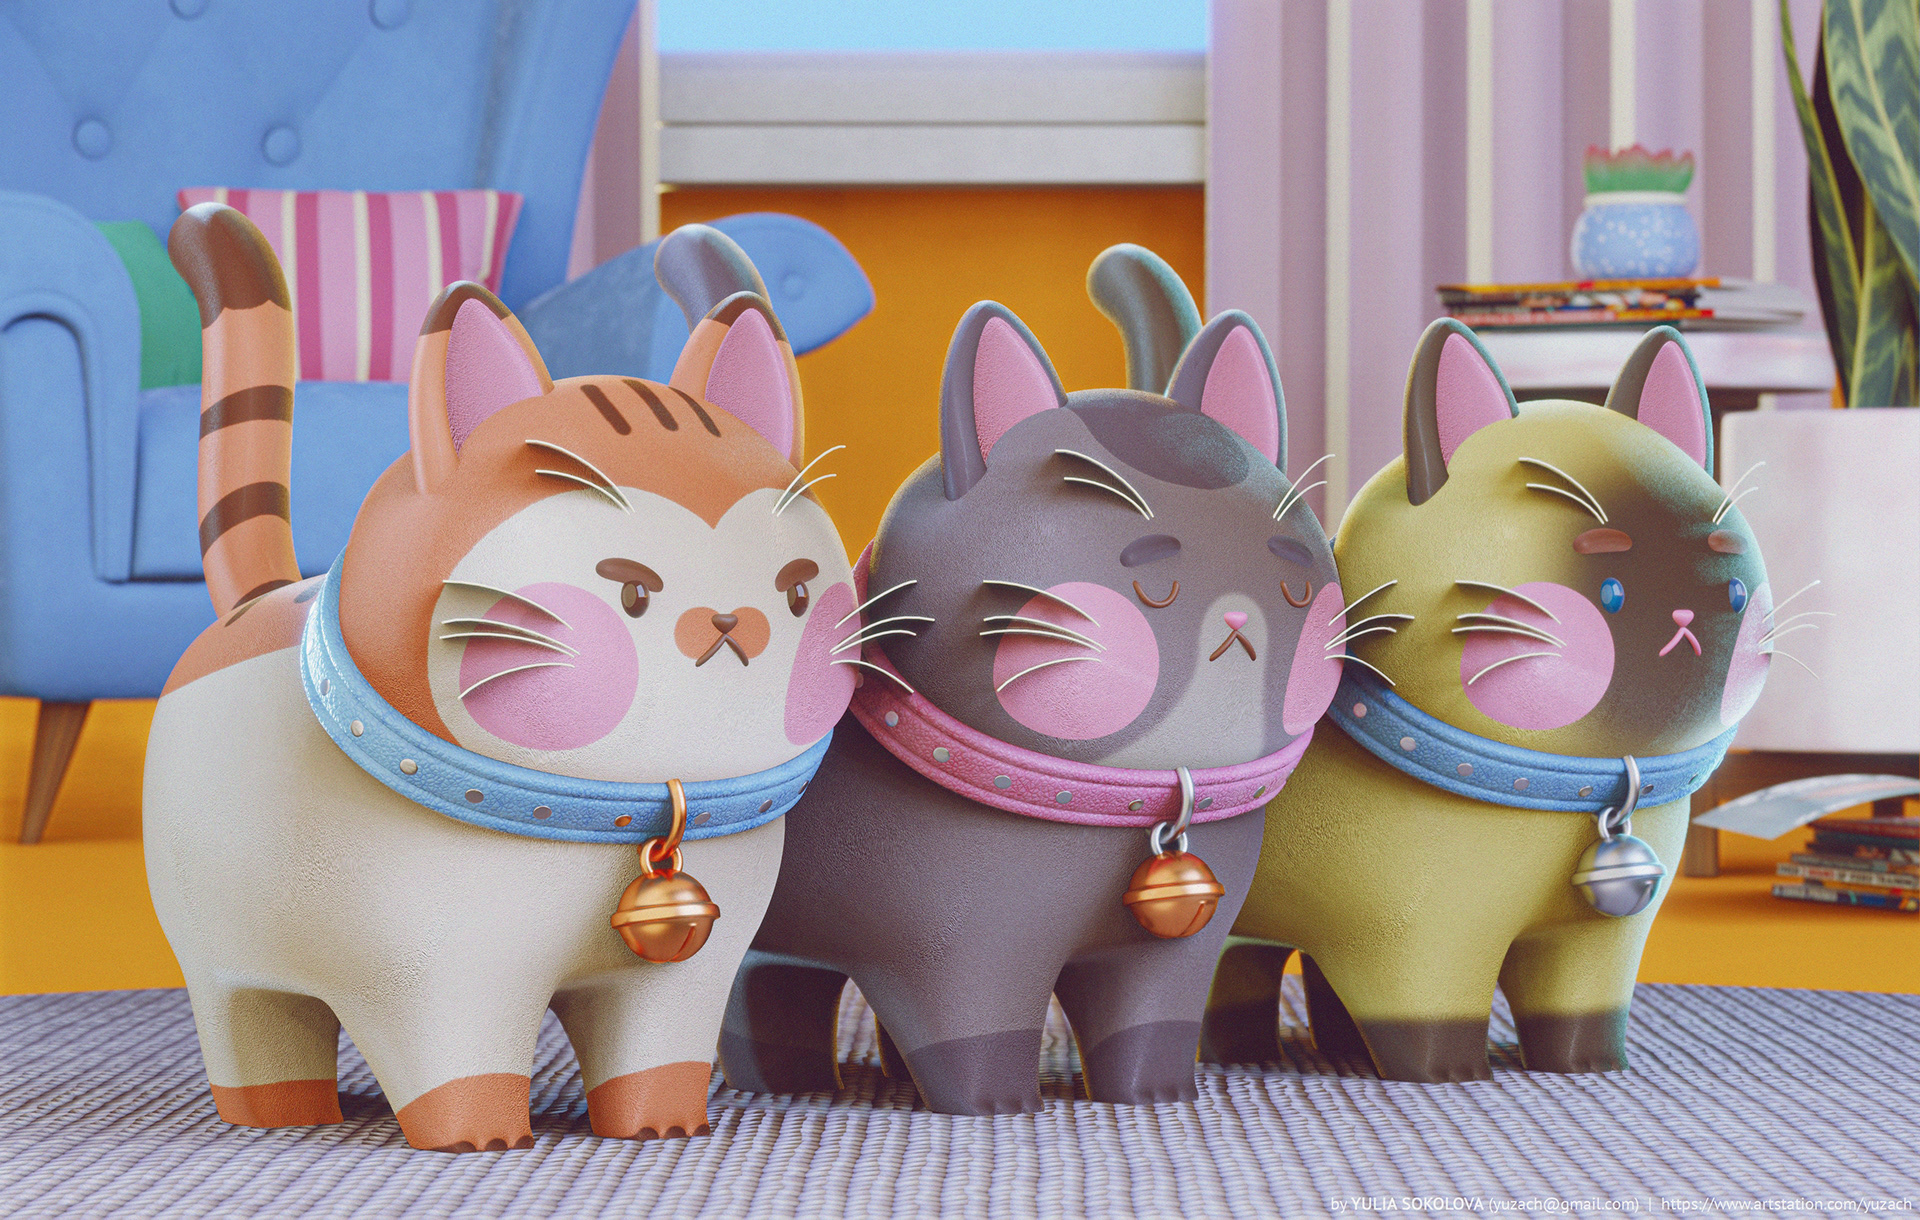 åndelig Energize Let at læse 3D scene with cartoon characters: cats, plants and stylized furniture,  rendered in Blender Eevee | Behance